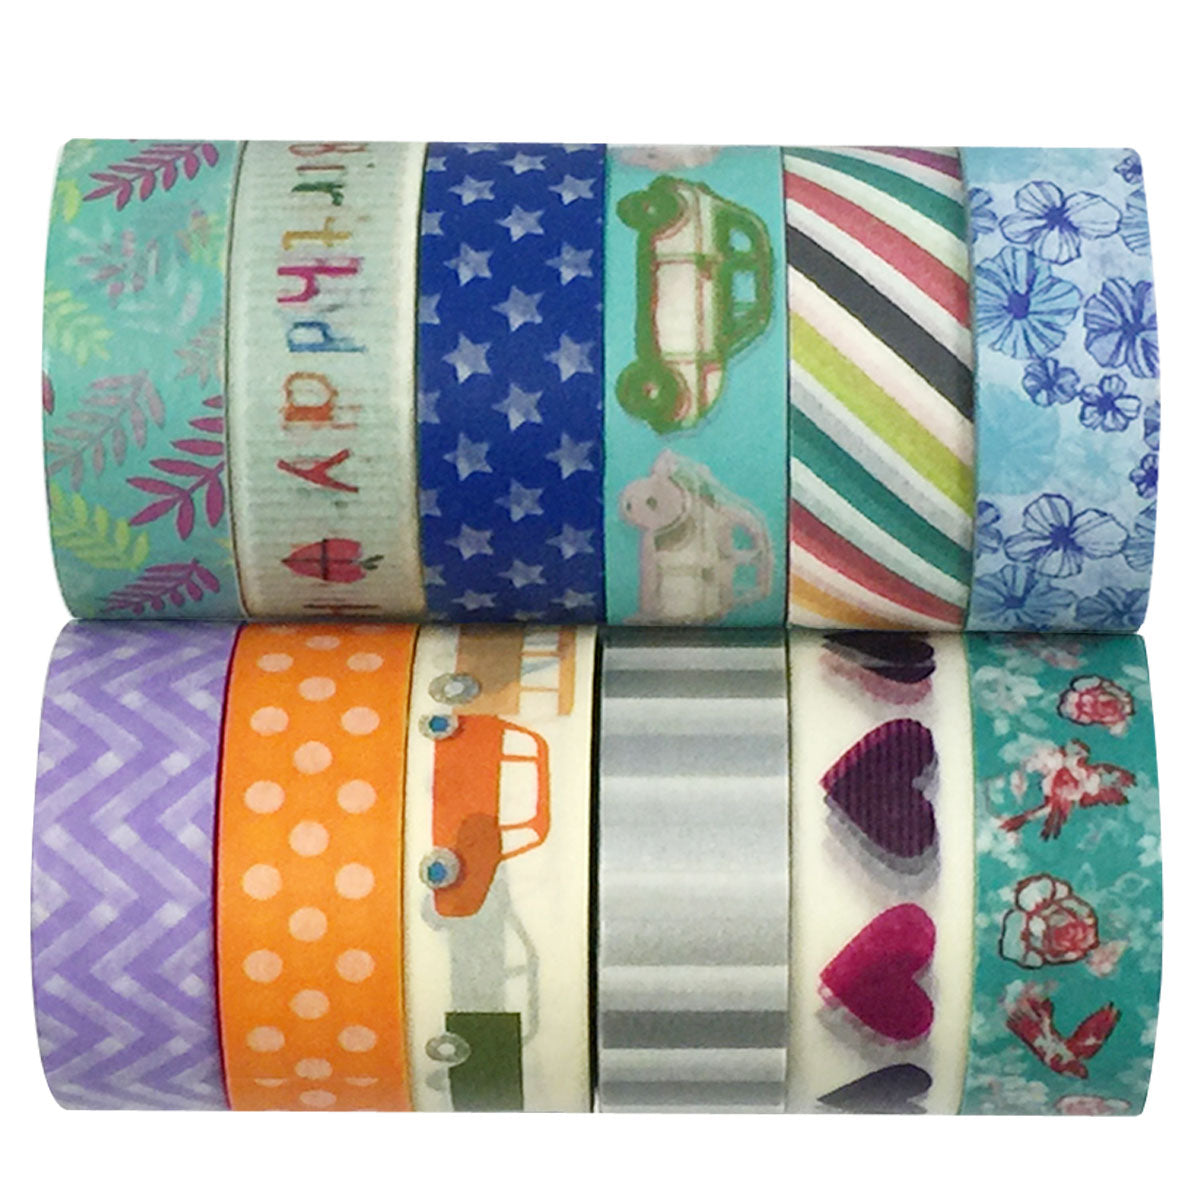 Wrapables Washi Tapes Decorative Masking Tapes, Set of 12, ADSET53, 12  pieces - Fry's Food Stores